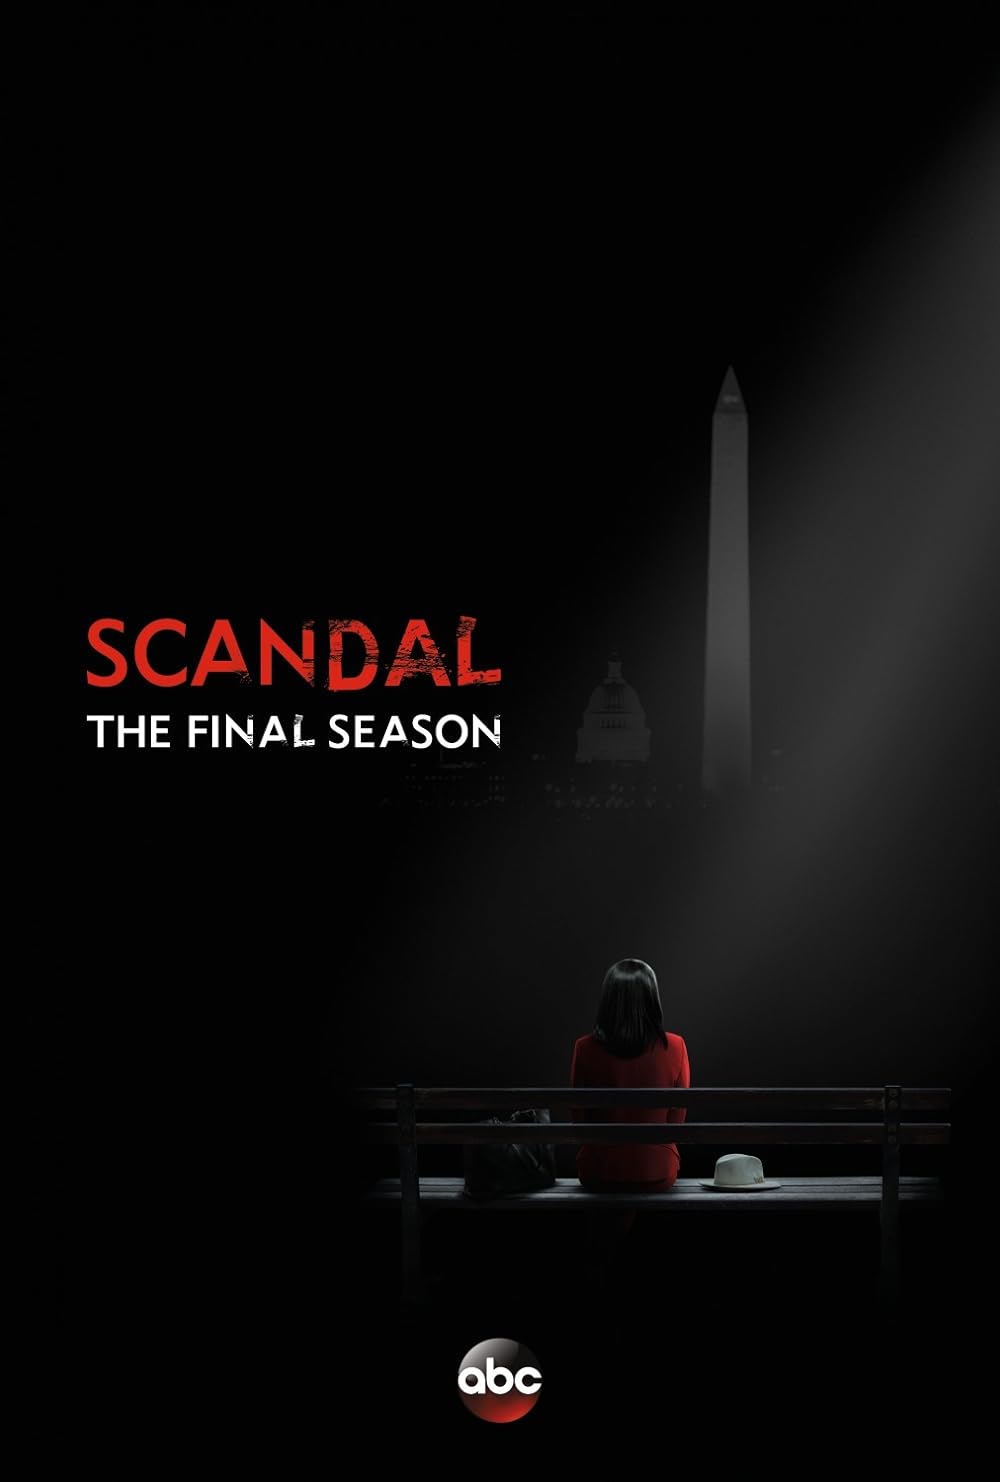 cristian ronald recommends scandal full episodes online pic